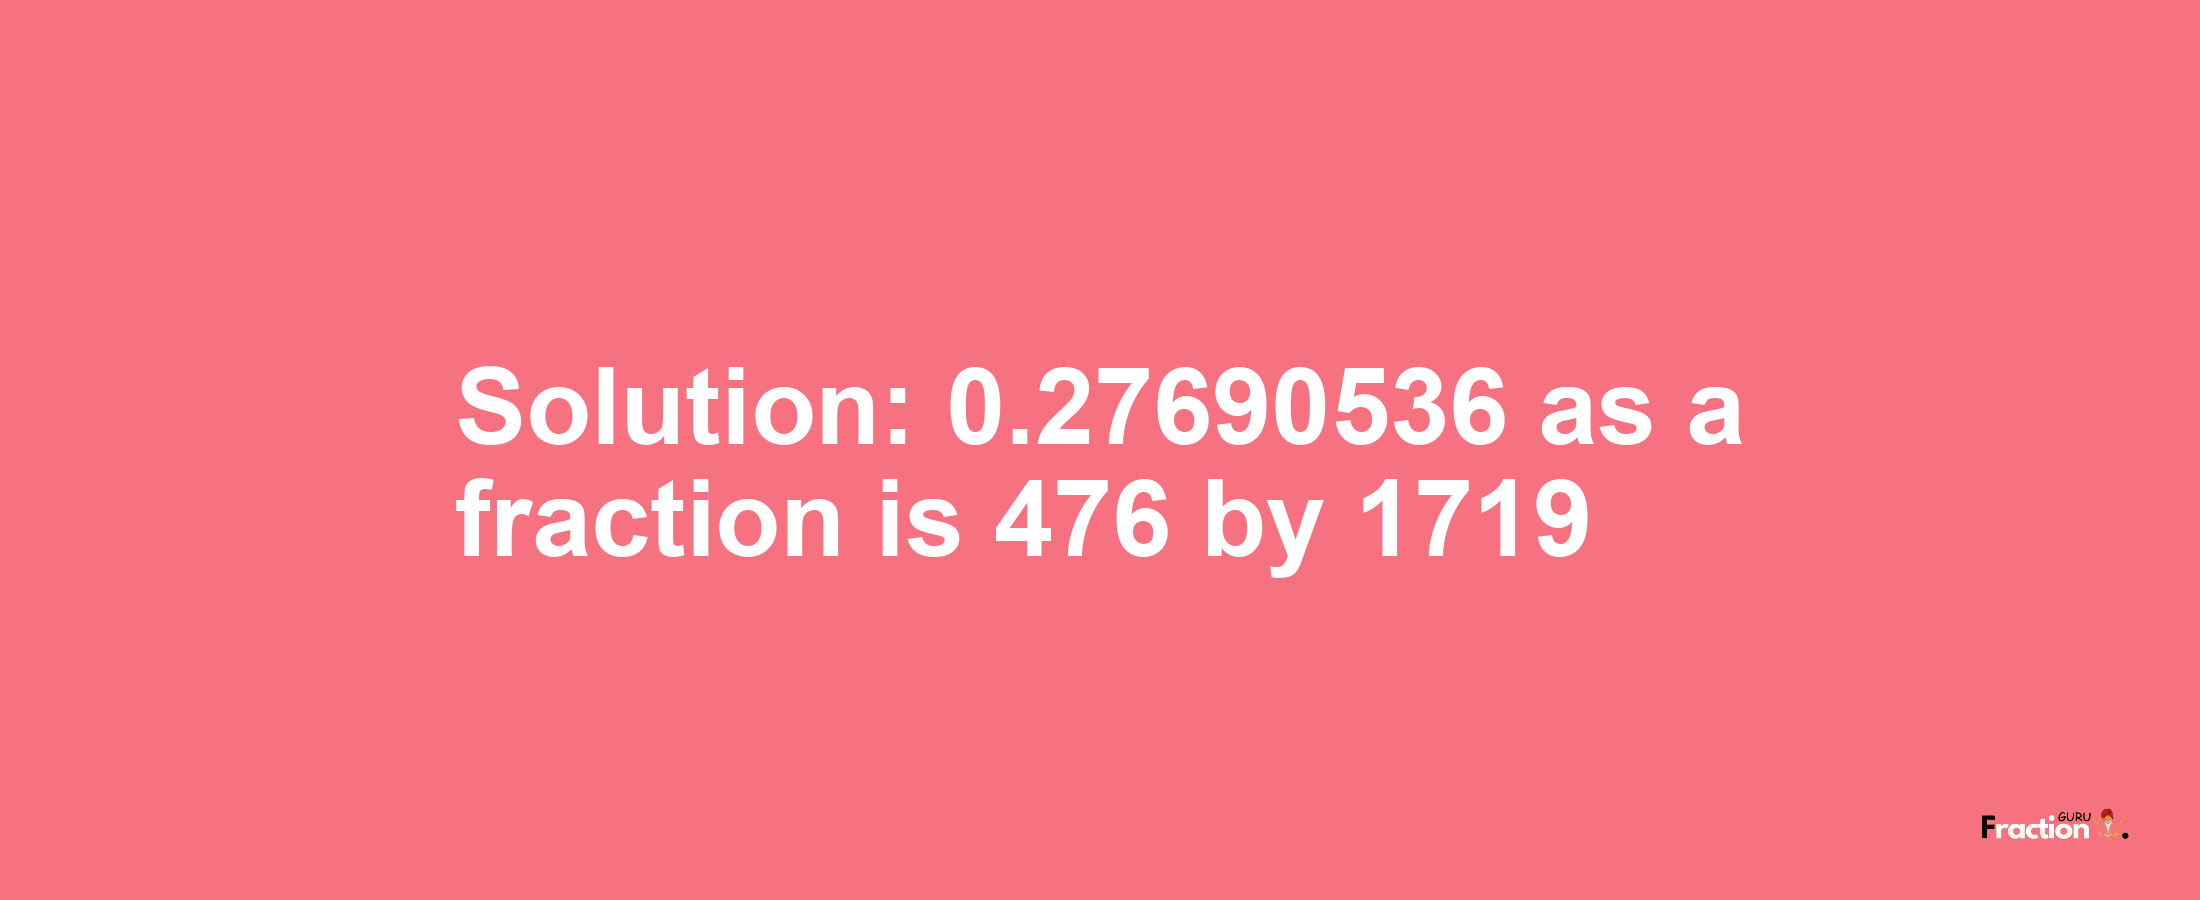 Solution:0.27690536 as a fraction is 476/1719